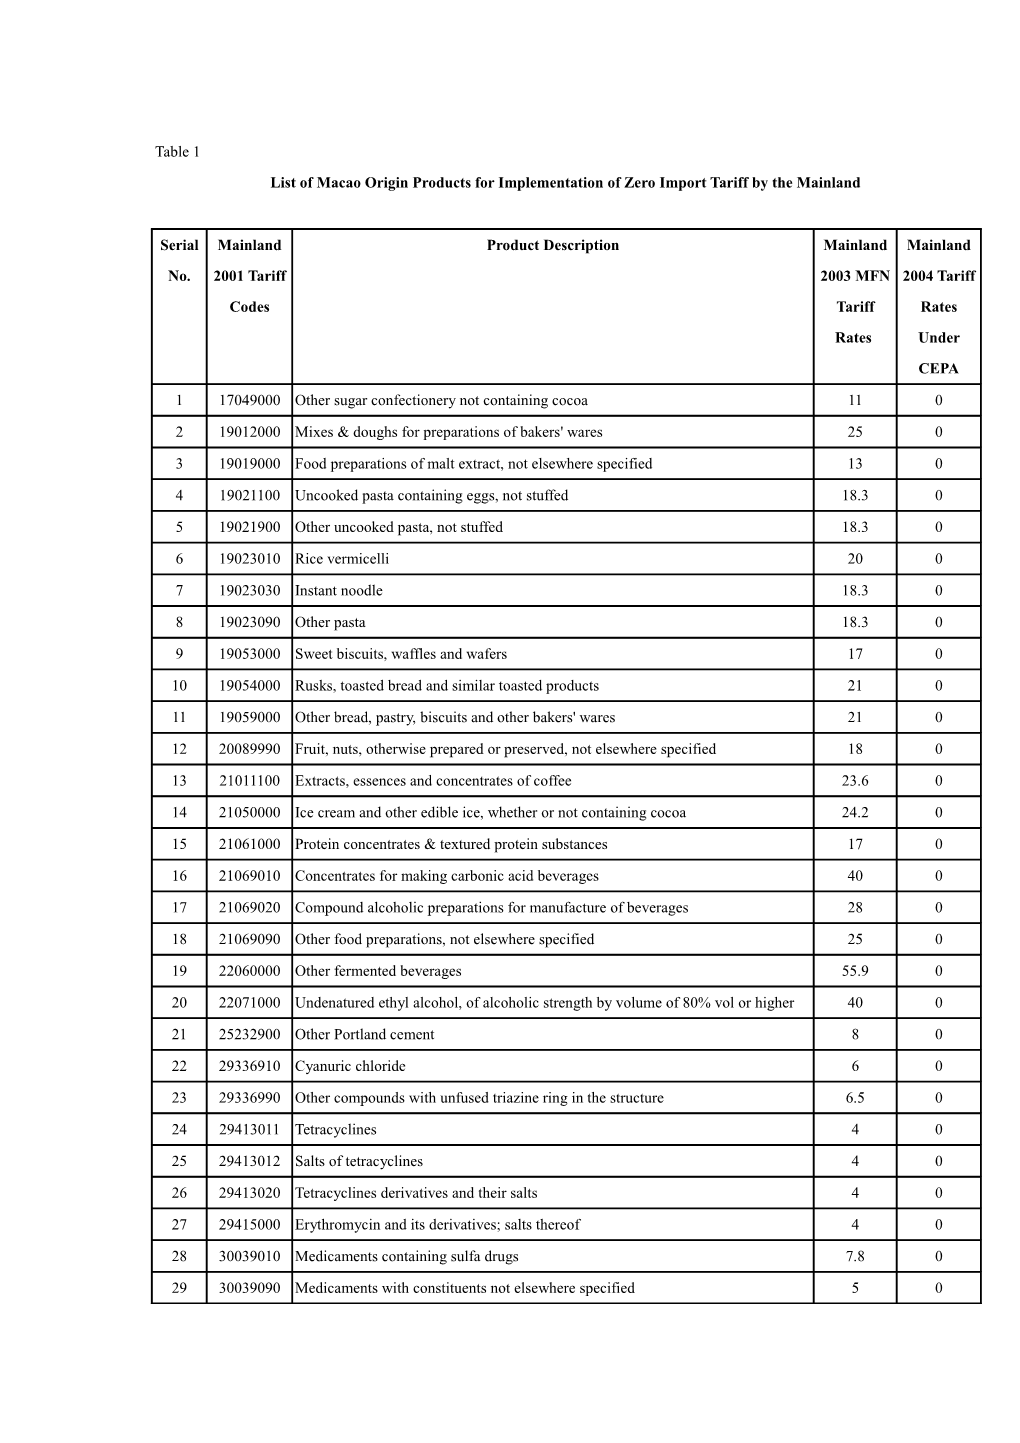 List of Macao Origin Products for Implementation of Zero Import Tariff by the Mainland